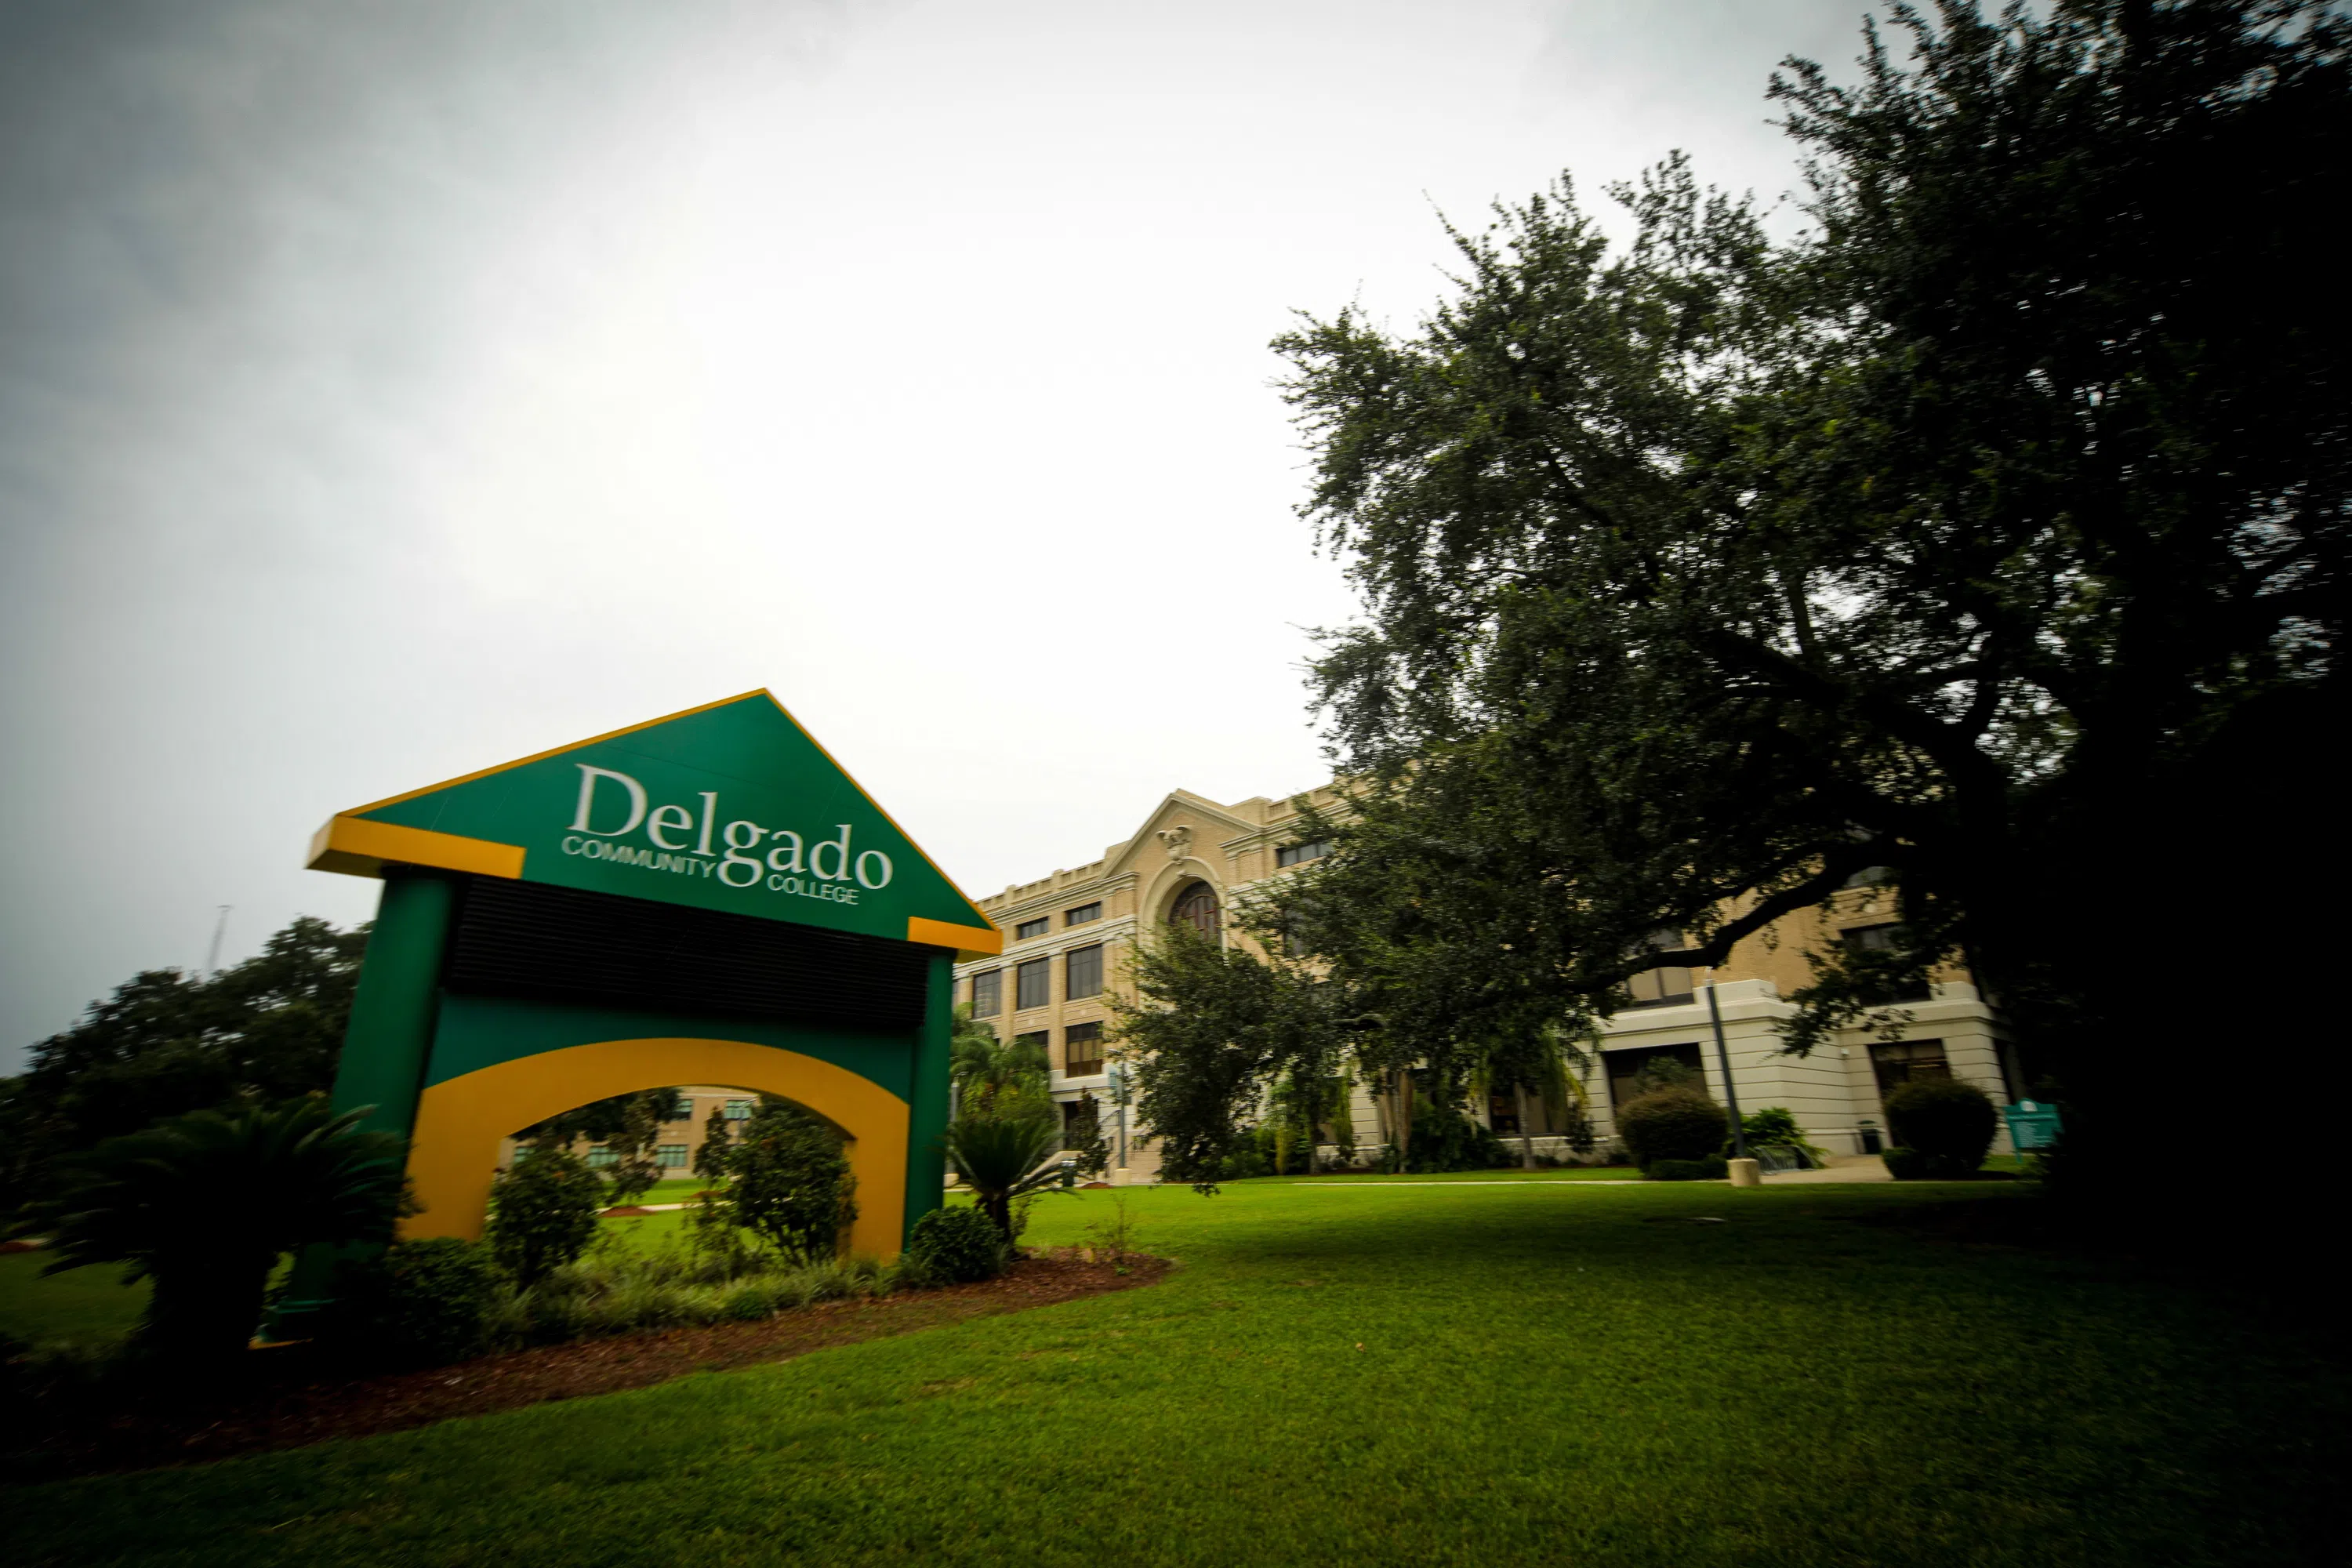 green and gold electronic sign with Delgado logo and building in back